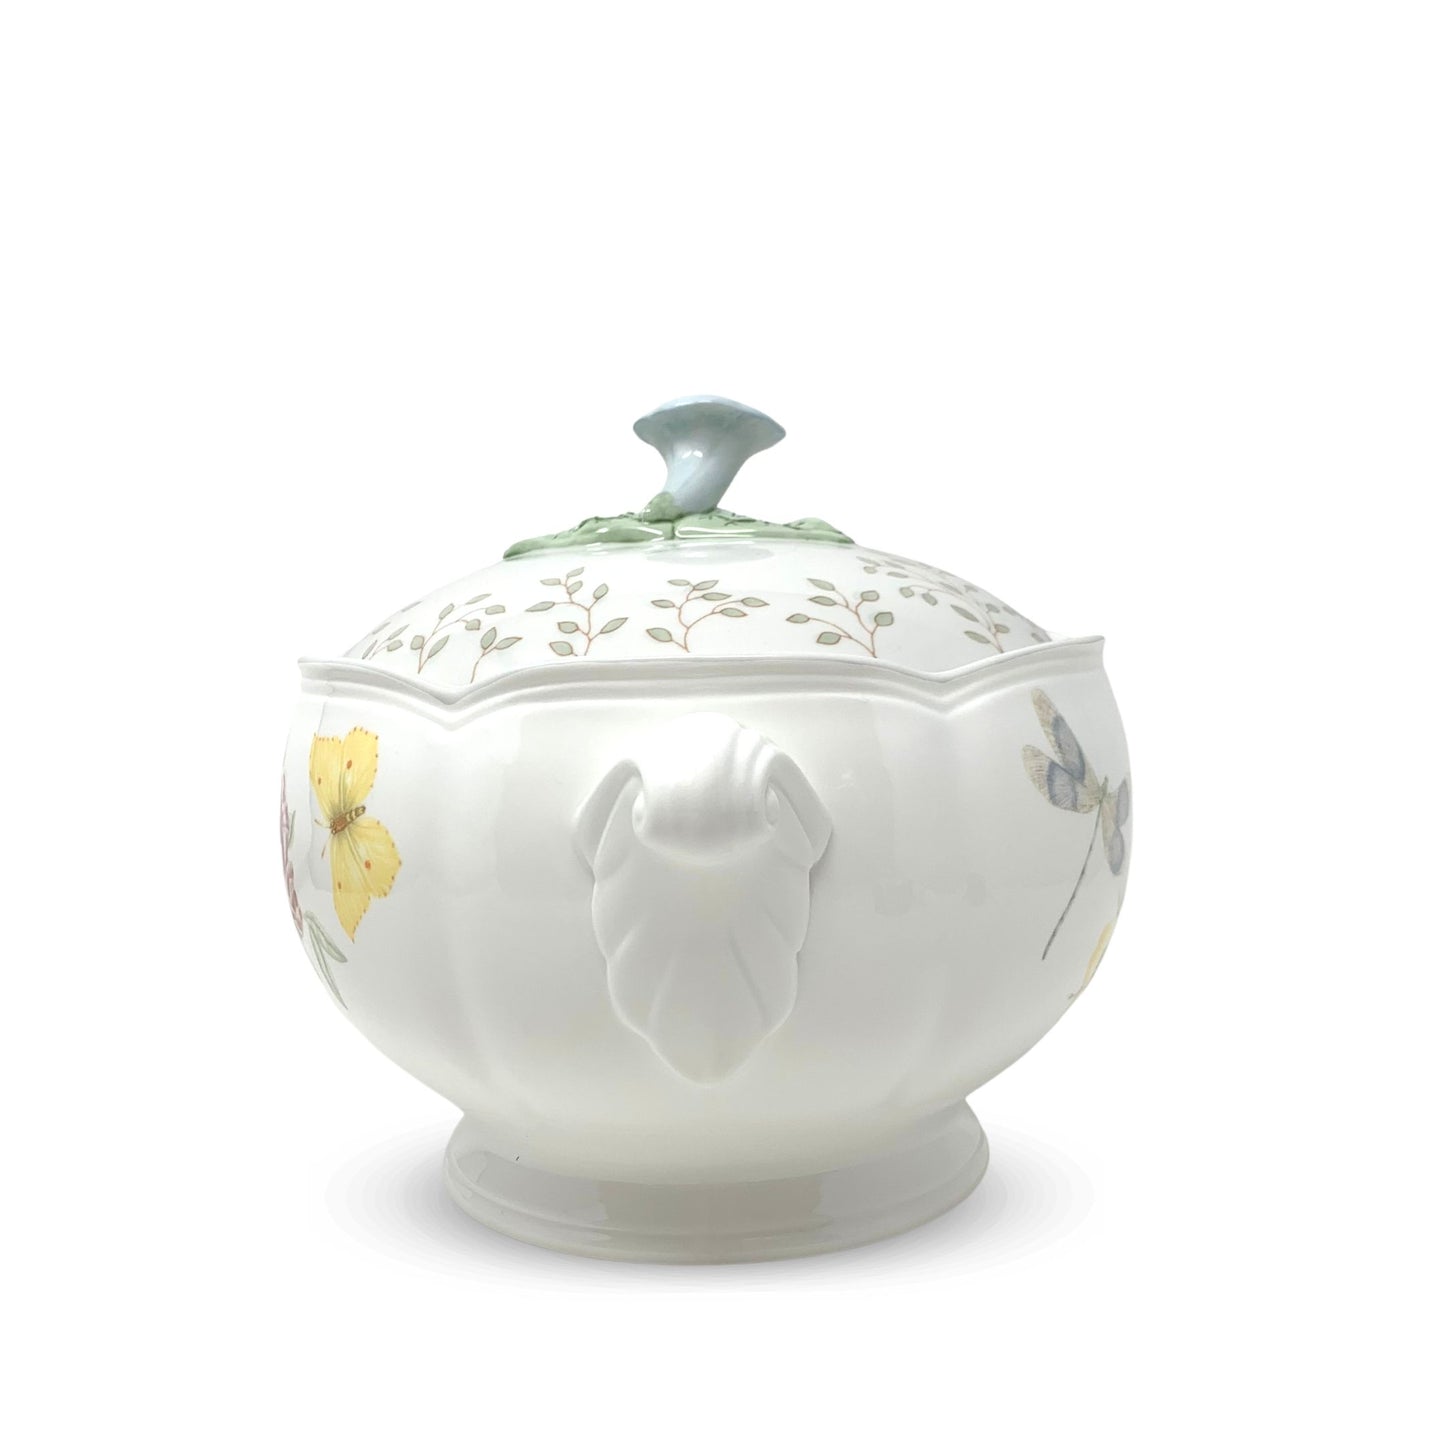 Lenox "Butterfly Meadow" Covered Soup Tureen